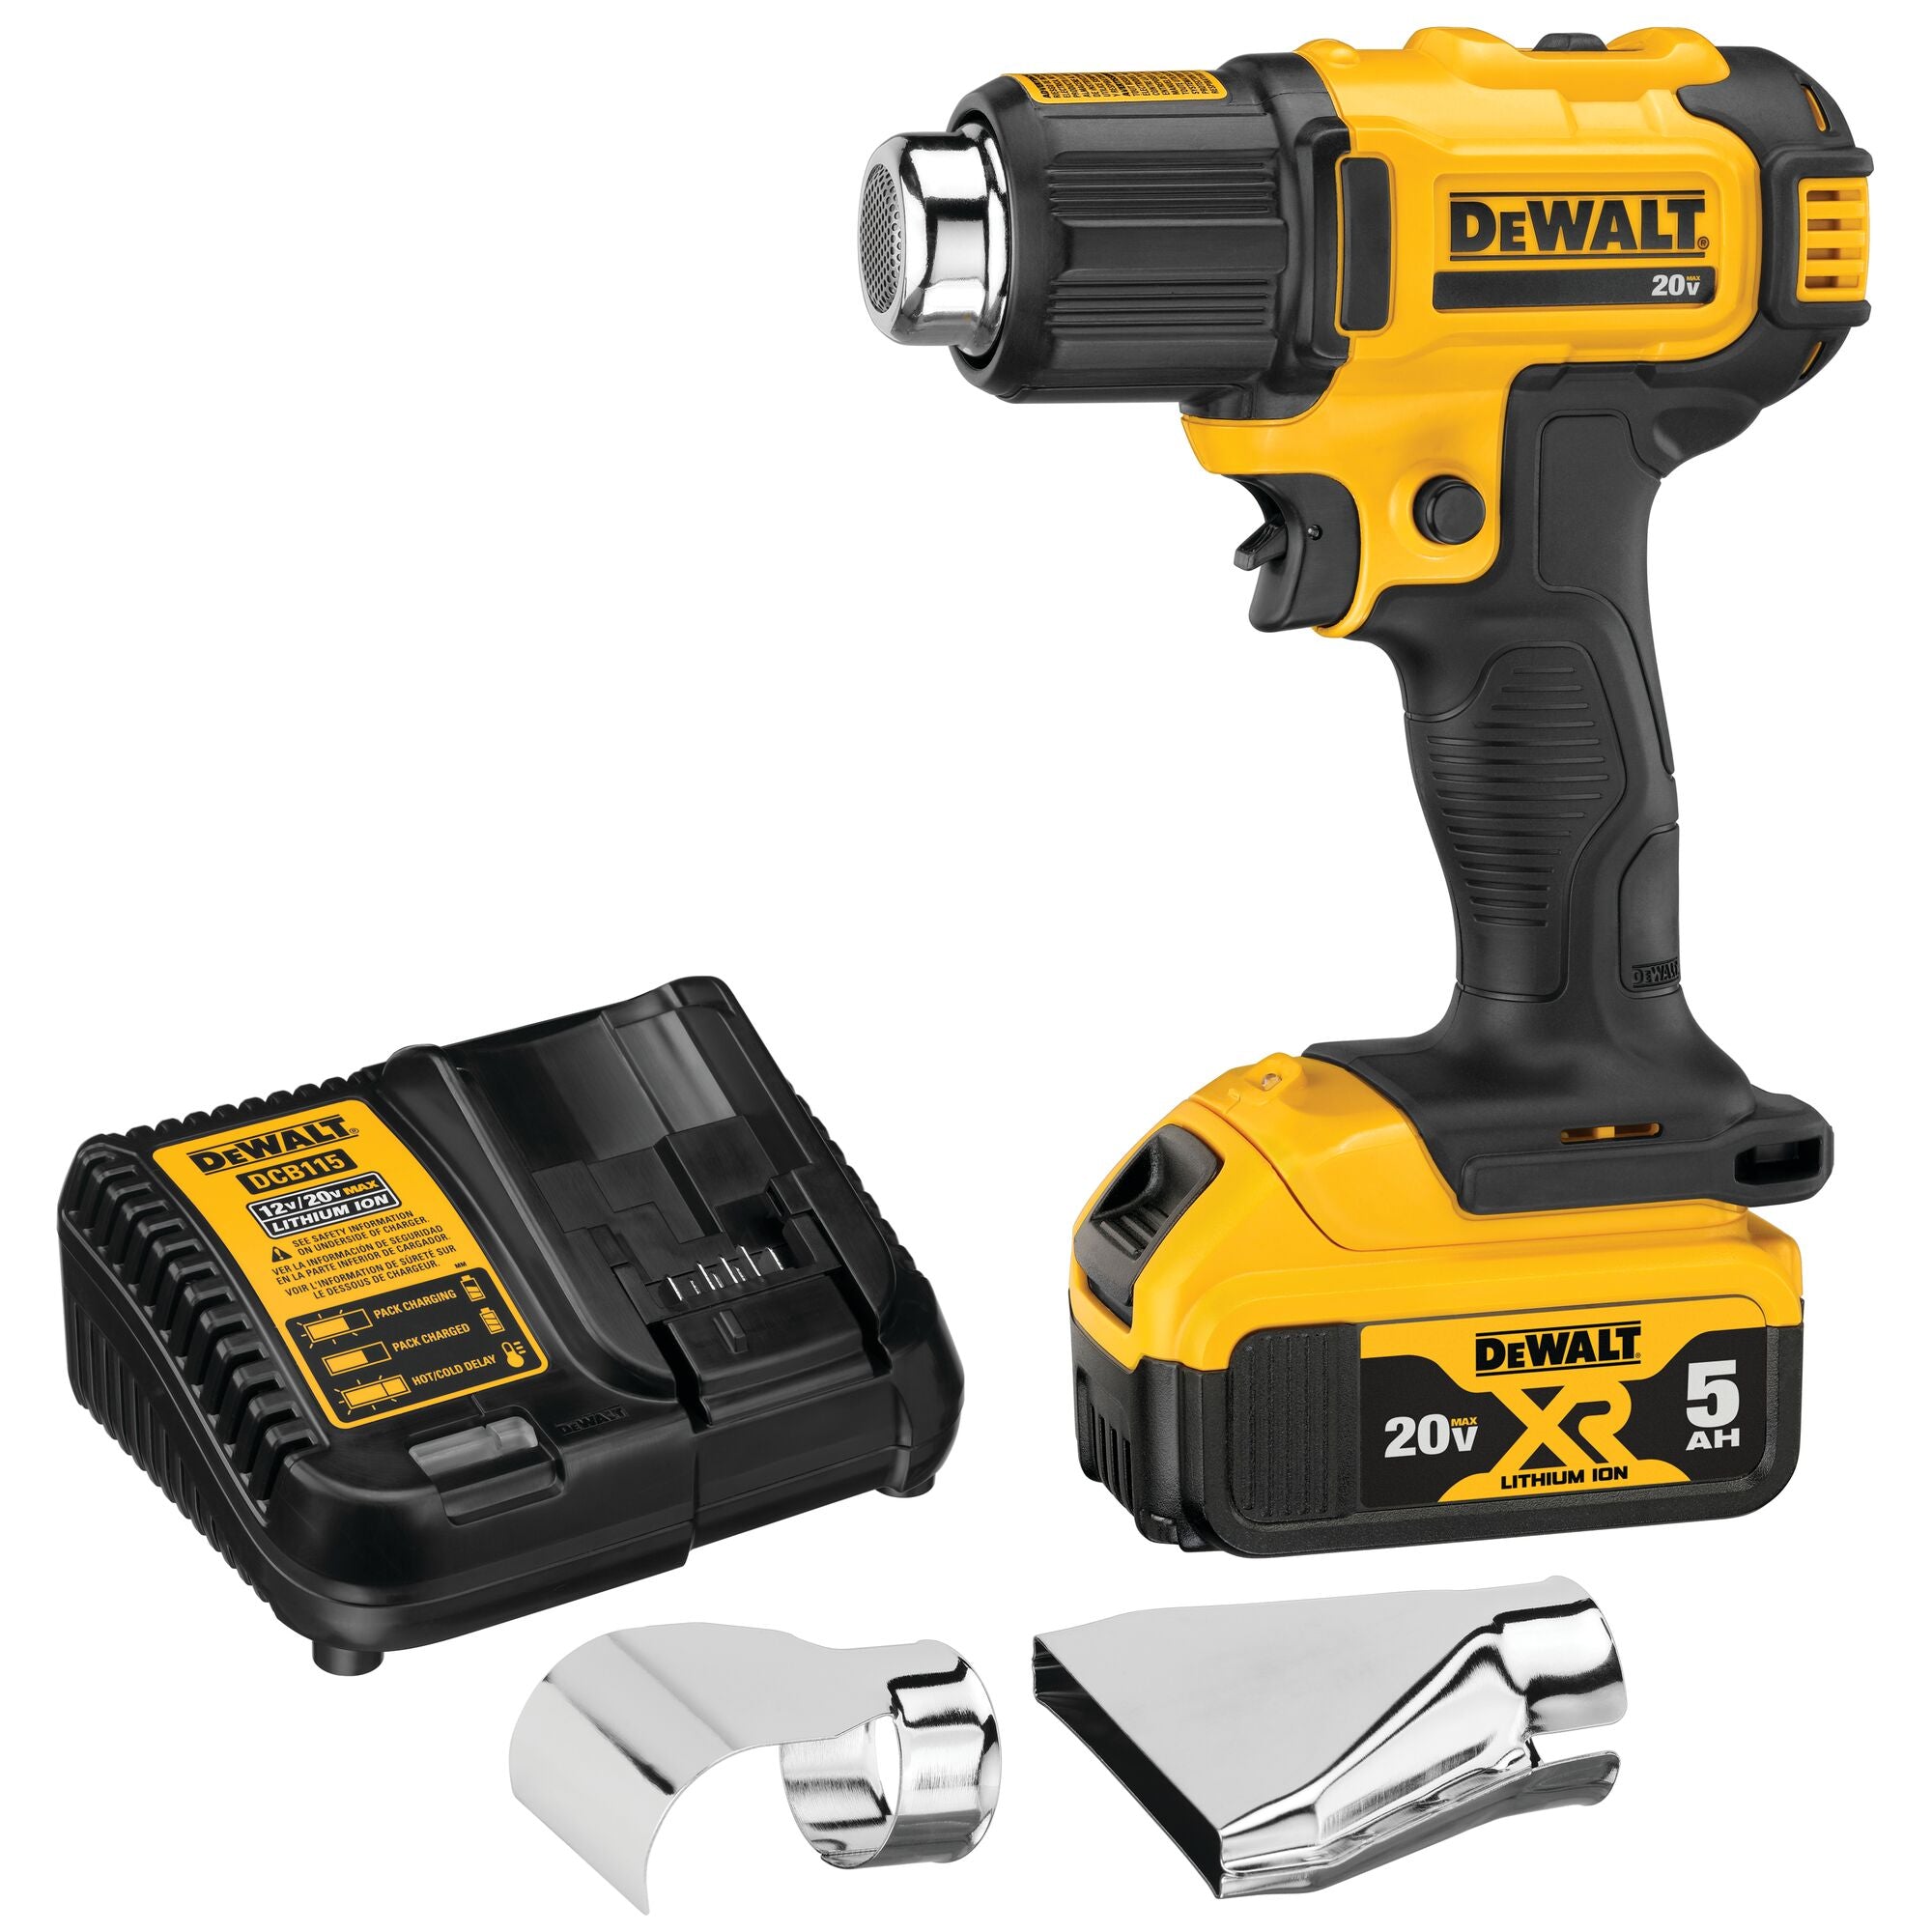 DeWALT Heat Gun Kit Up to 990 Degrees F Comes with 1 Batter and Charger 20 Volt